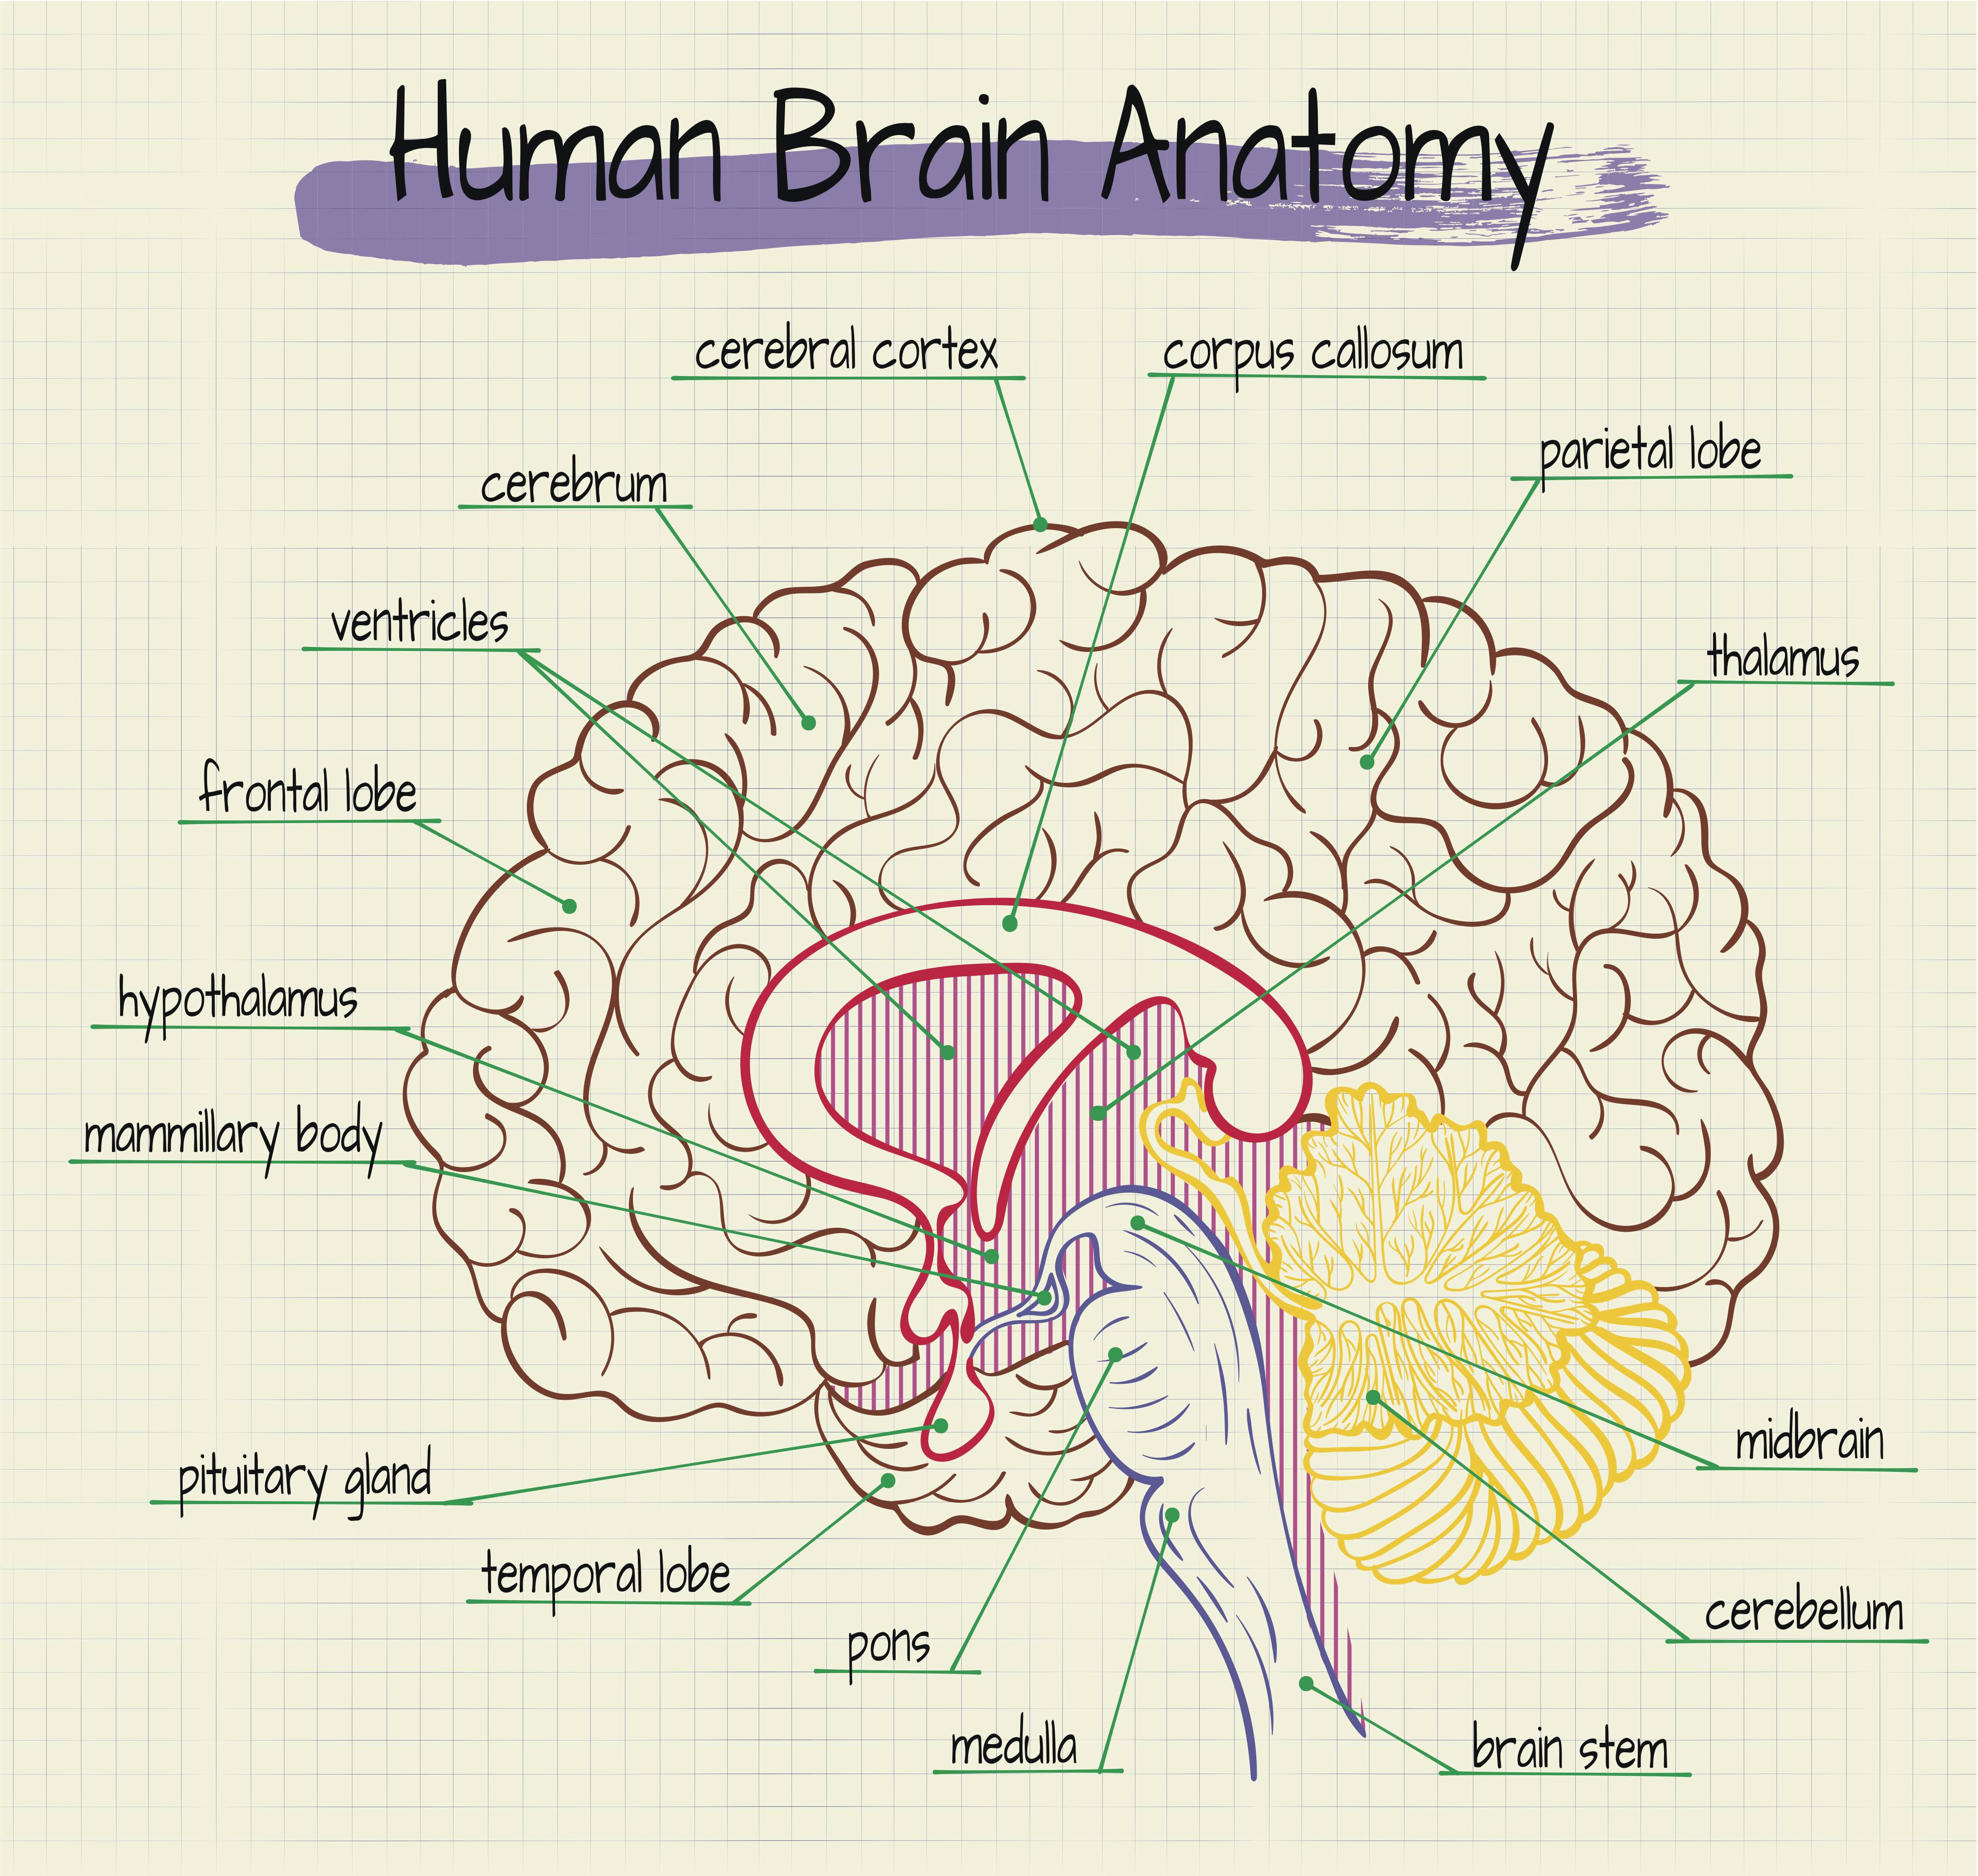 Guide To Basic Brain Anatomy Learn The Parts Of The Brain Images And